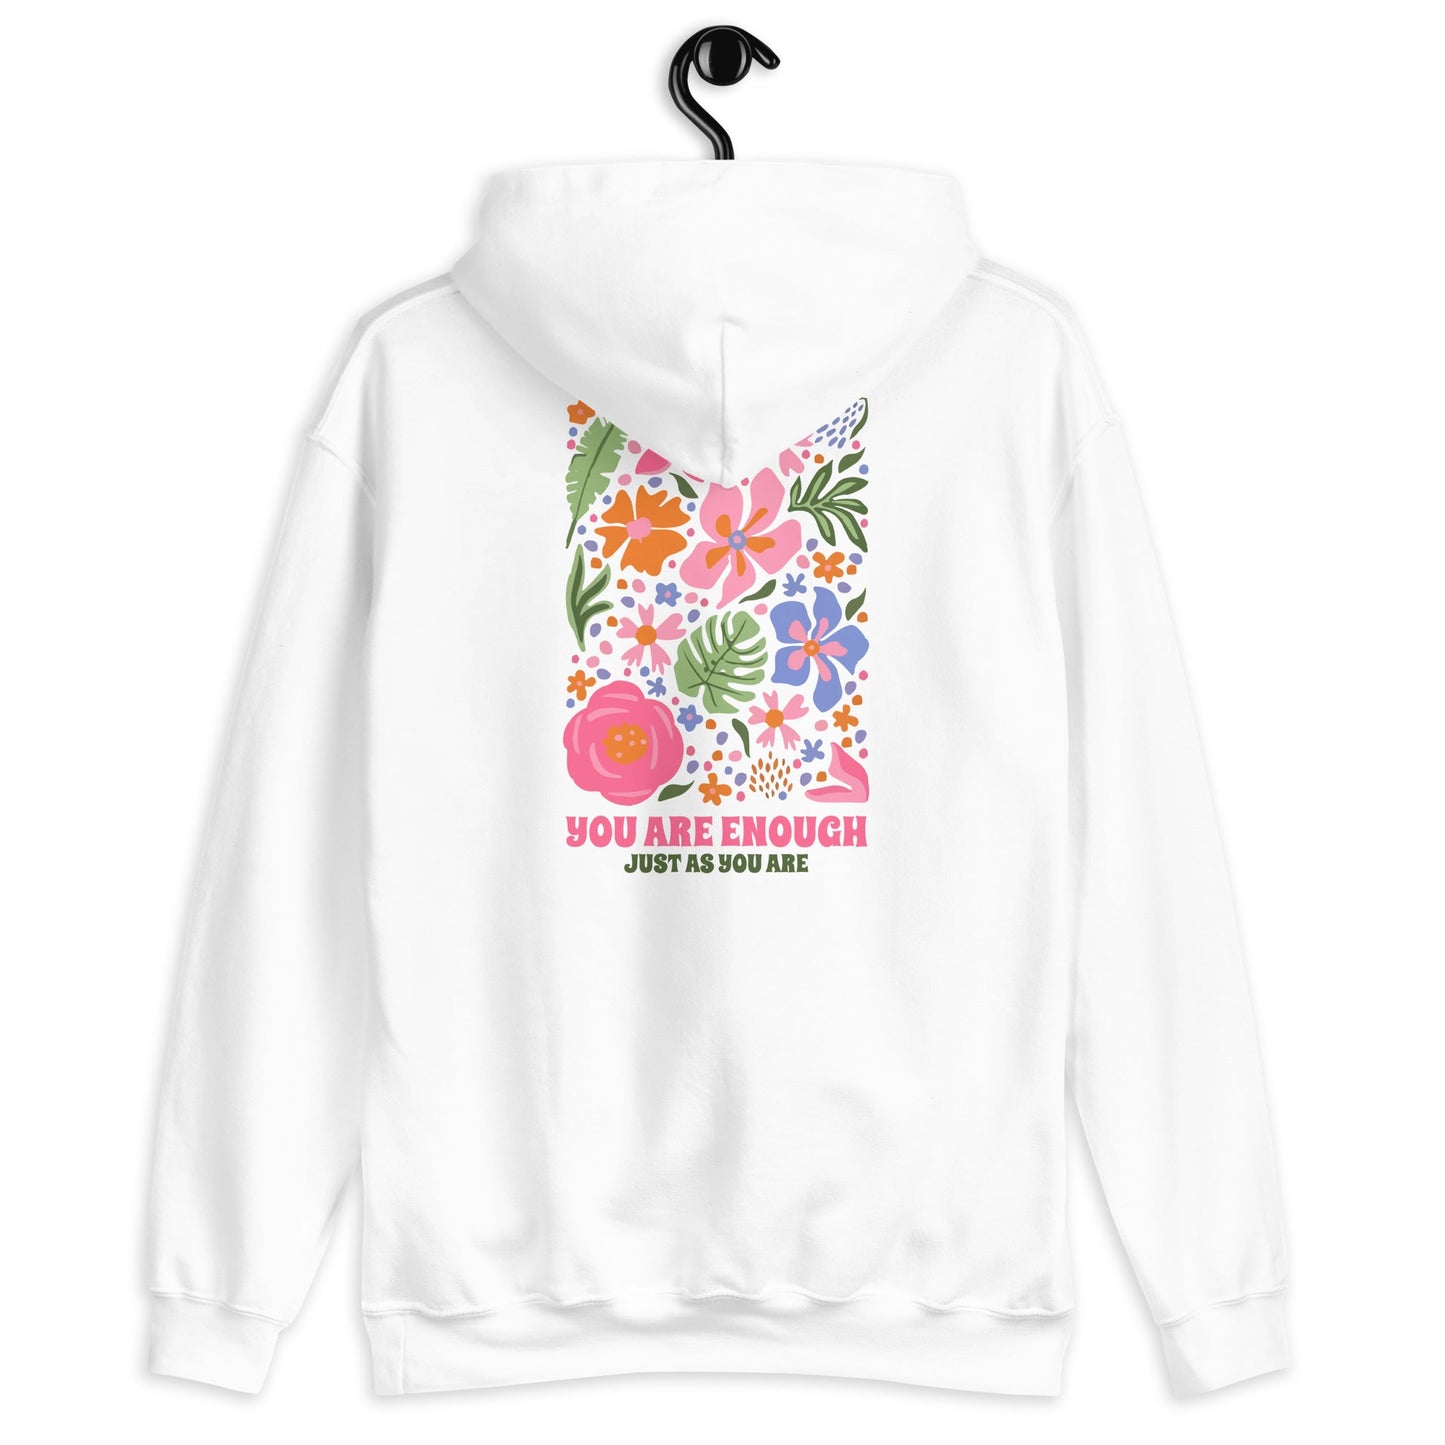 You Are Enough Just As You Are Pullover Hoodie